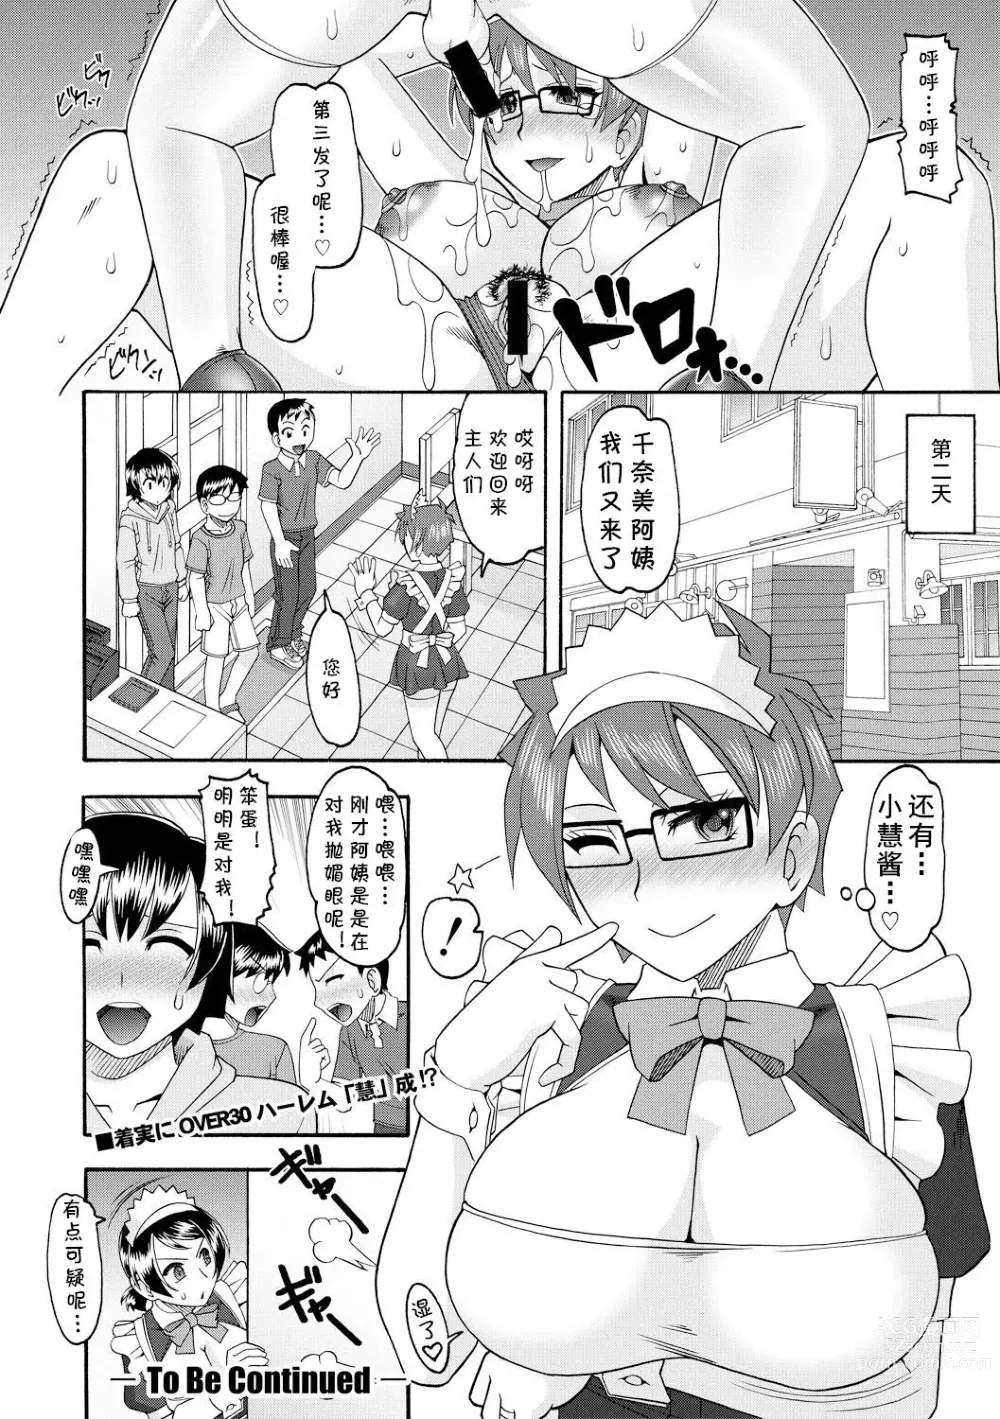 Page 18 of manga Maid-san OVER 30 Part 2